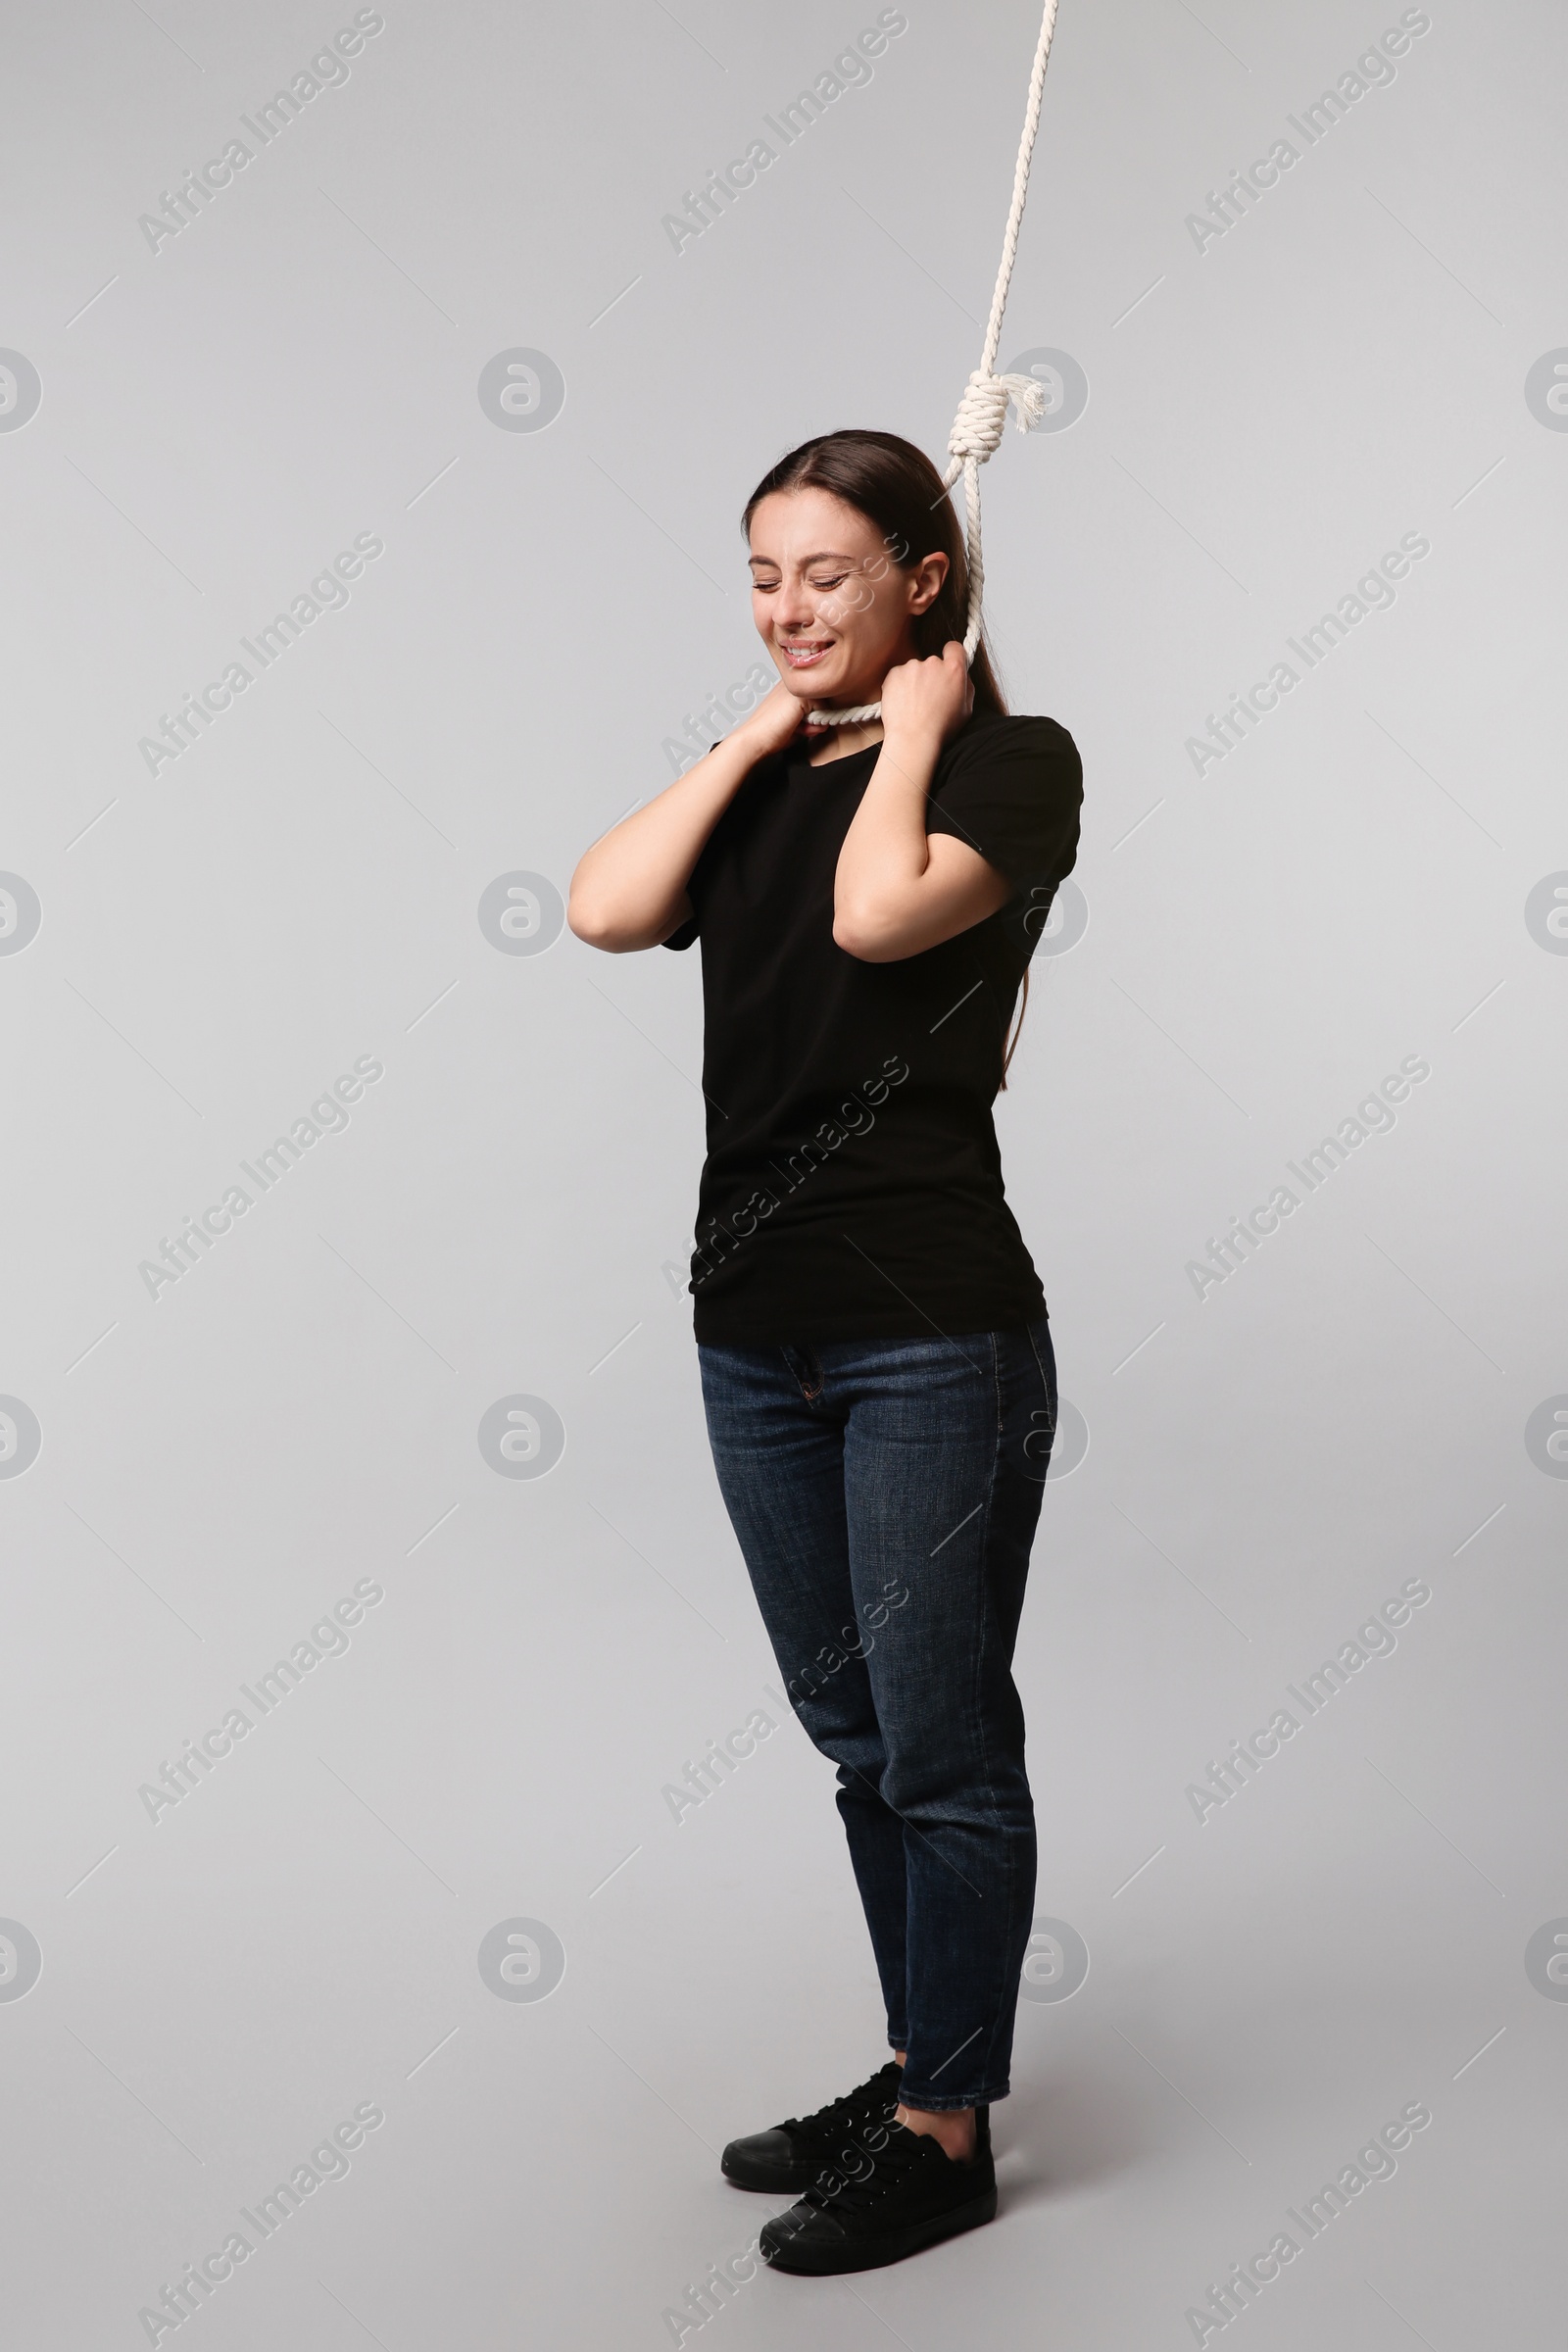 Photo of Depressed woman with rope noose on neck against light grey background